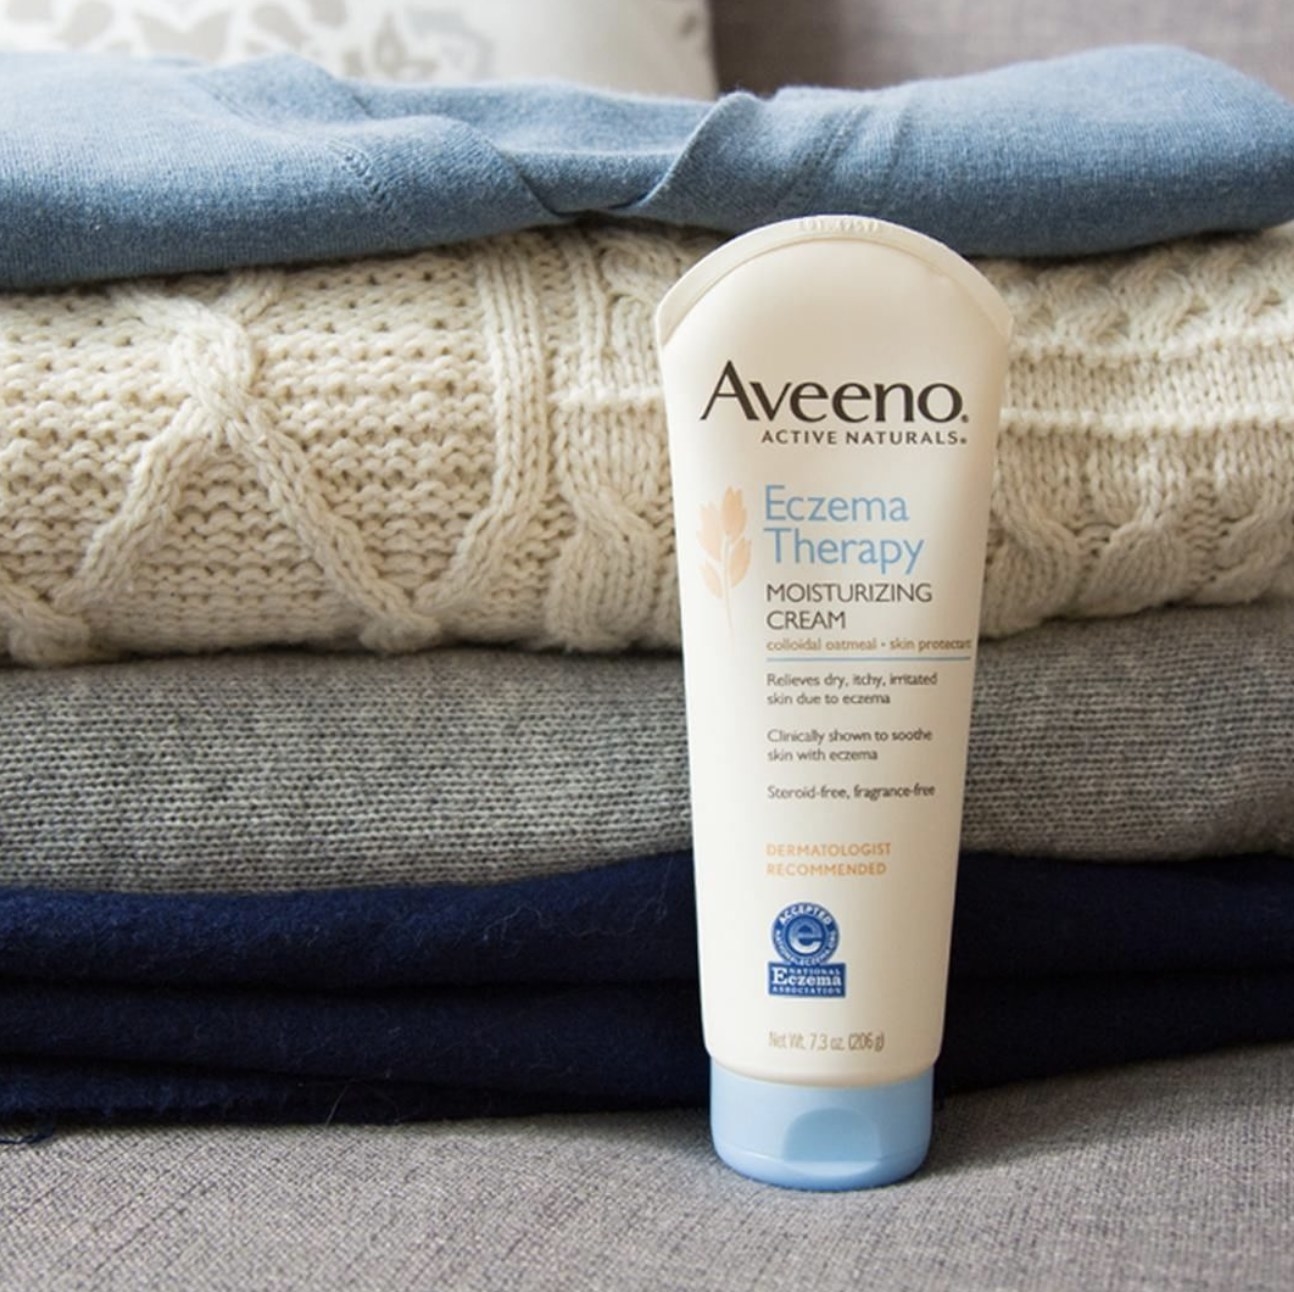 Aveeno Active Naturals Eczema Therapy Moisturizing Cream relieves dry, itchy, irritated skin due to eczema and is clinically shown to soothe skin with eczema and is steroid- and fragrance-free